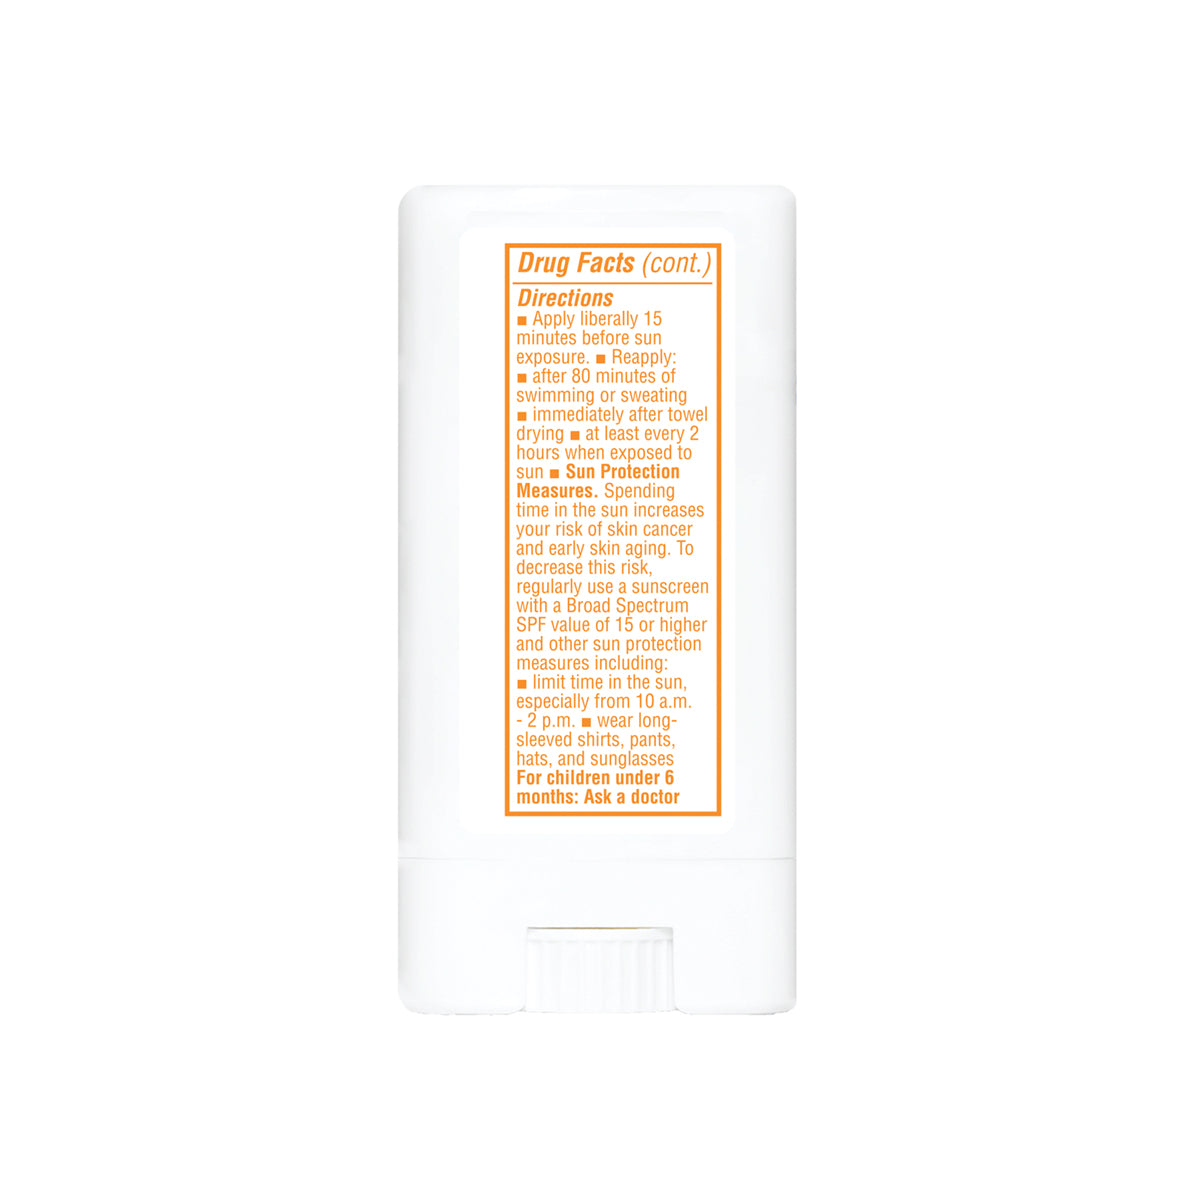 Back of the Thinkbaby sunscreen stick packaging showing drug directions, including application instructions and sun safety measures